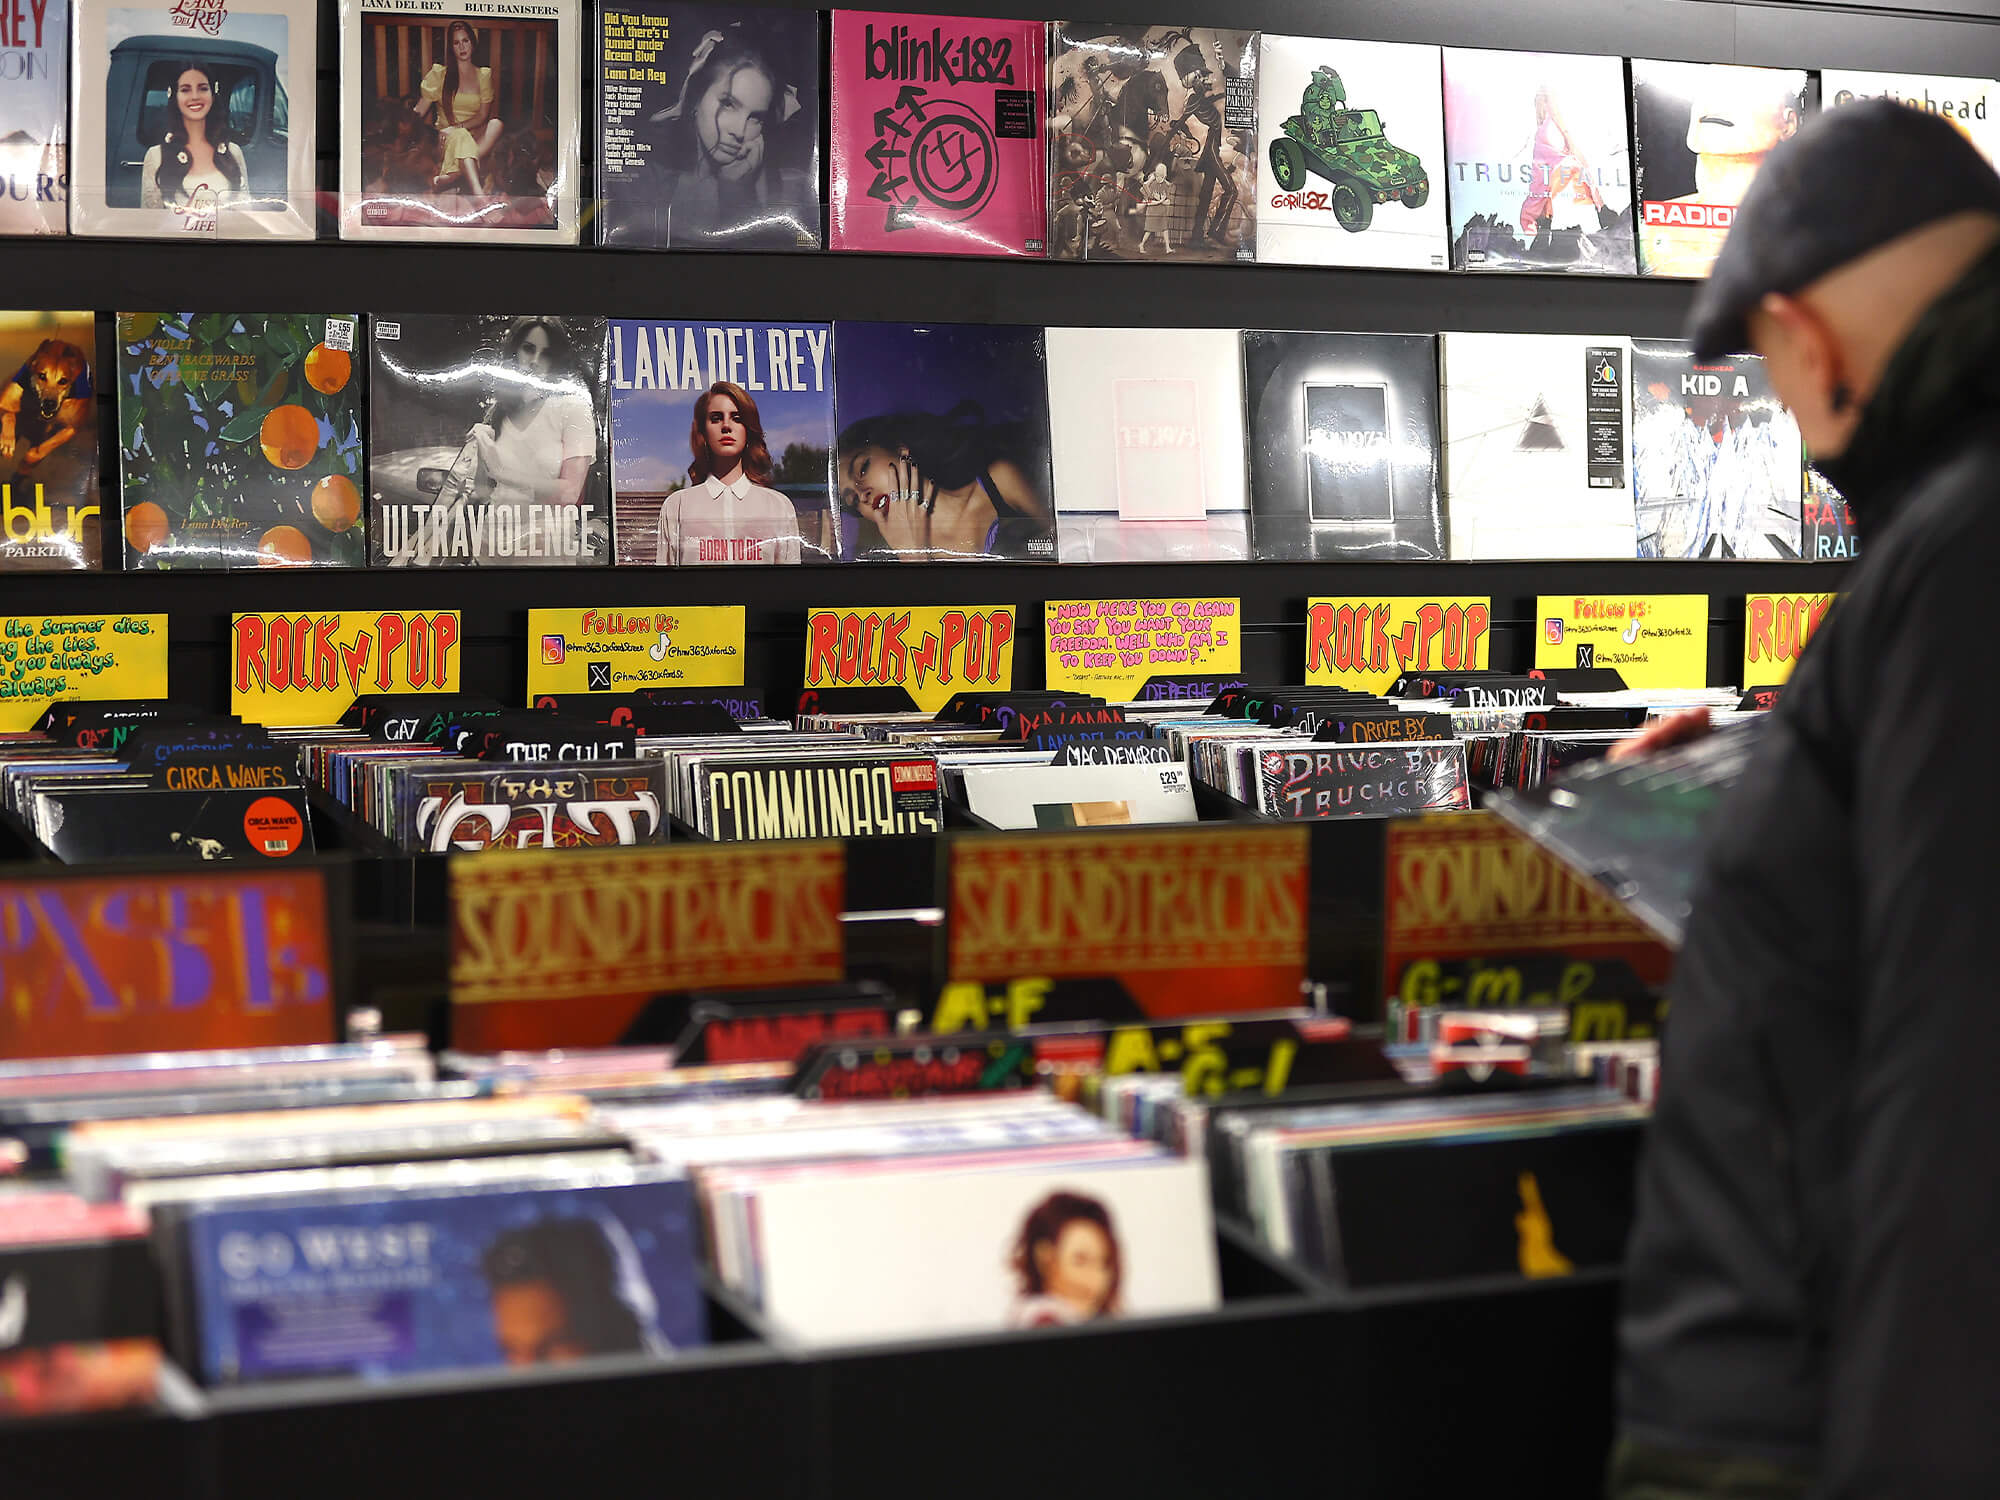 Vinyl records displayed on the wall in HMV. There are also large boxes filled with vinyls, which are sorted under labels such as "rock" and "pop". A person stands to the right of the photo, holding one of the records.